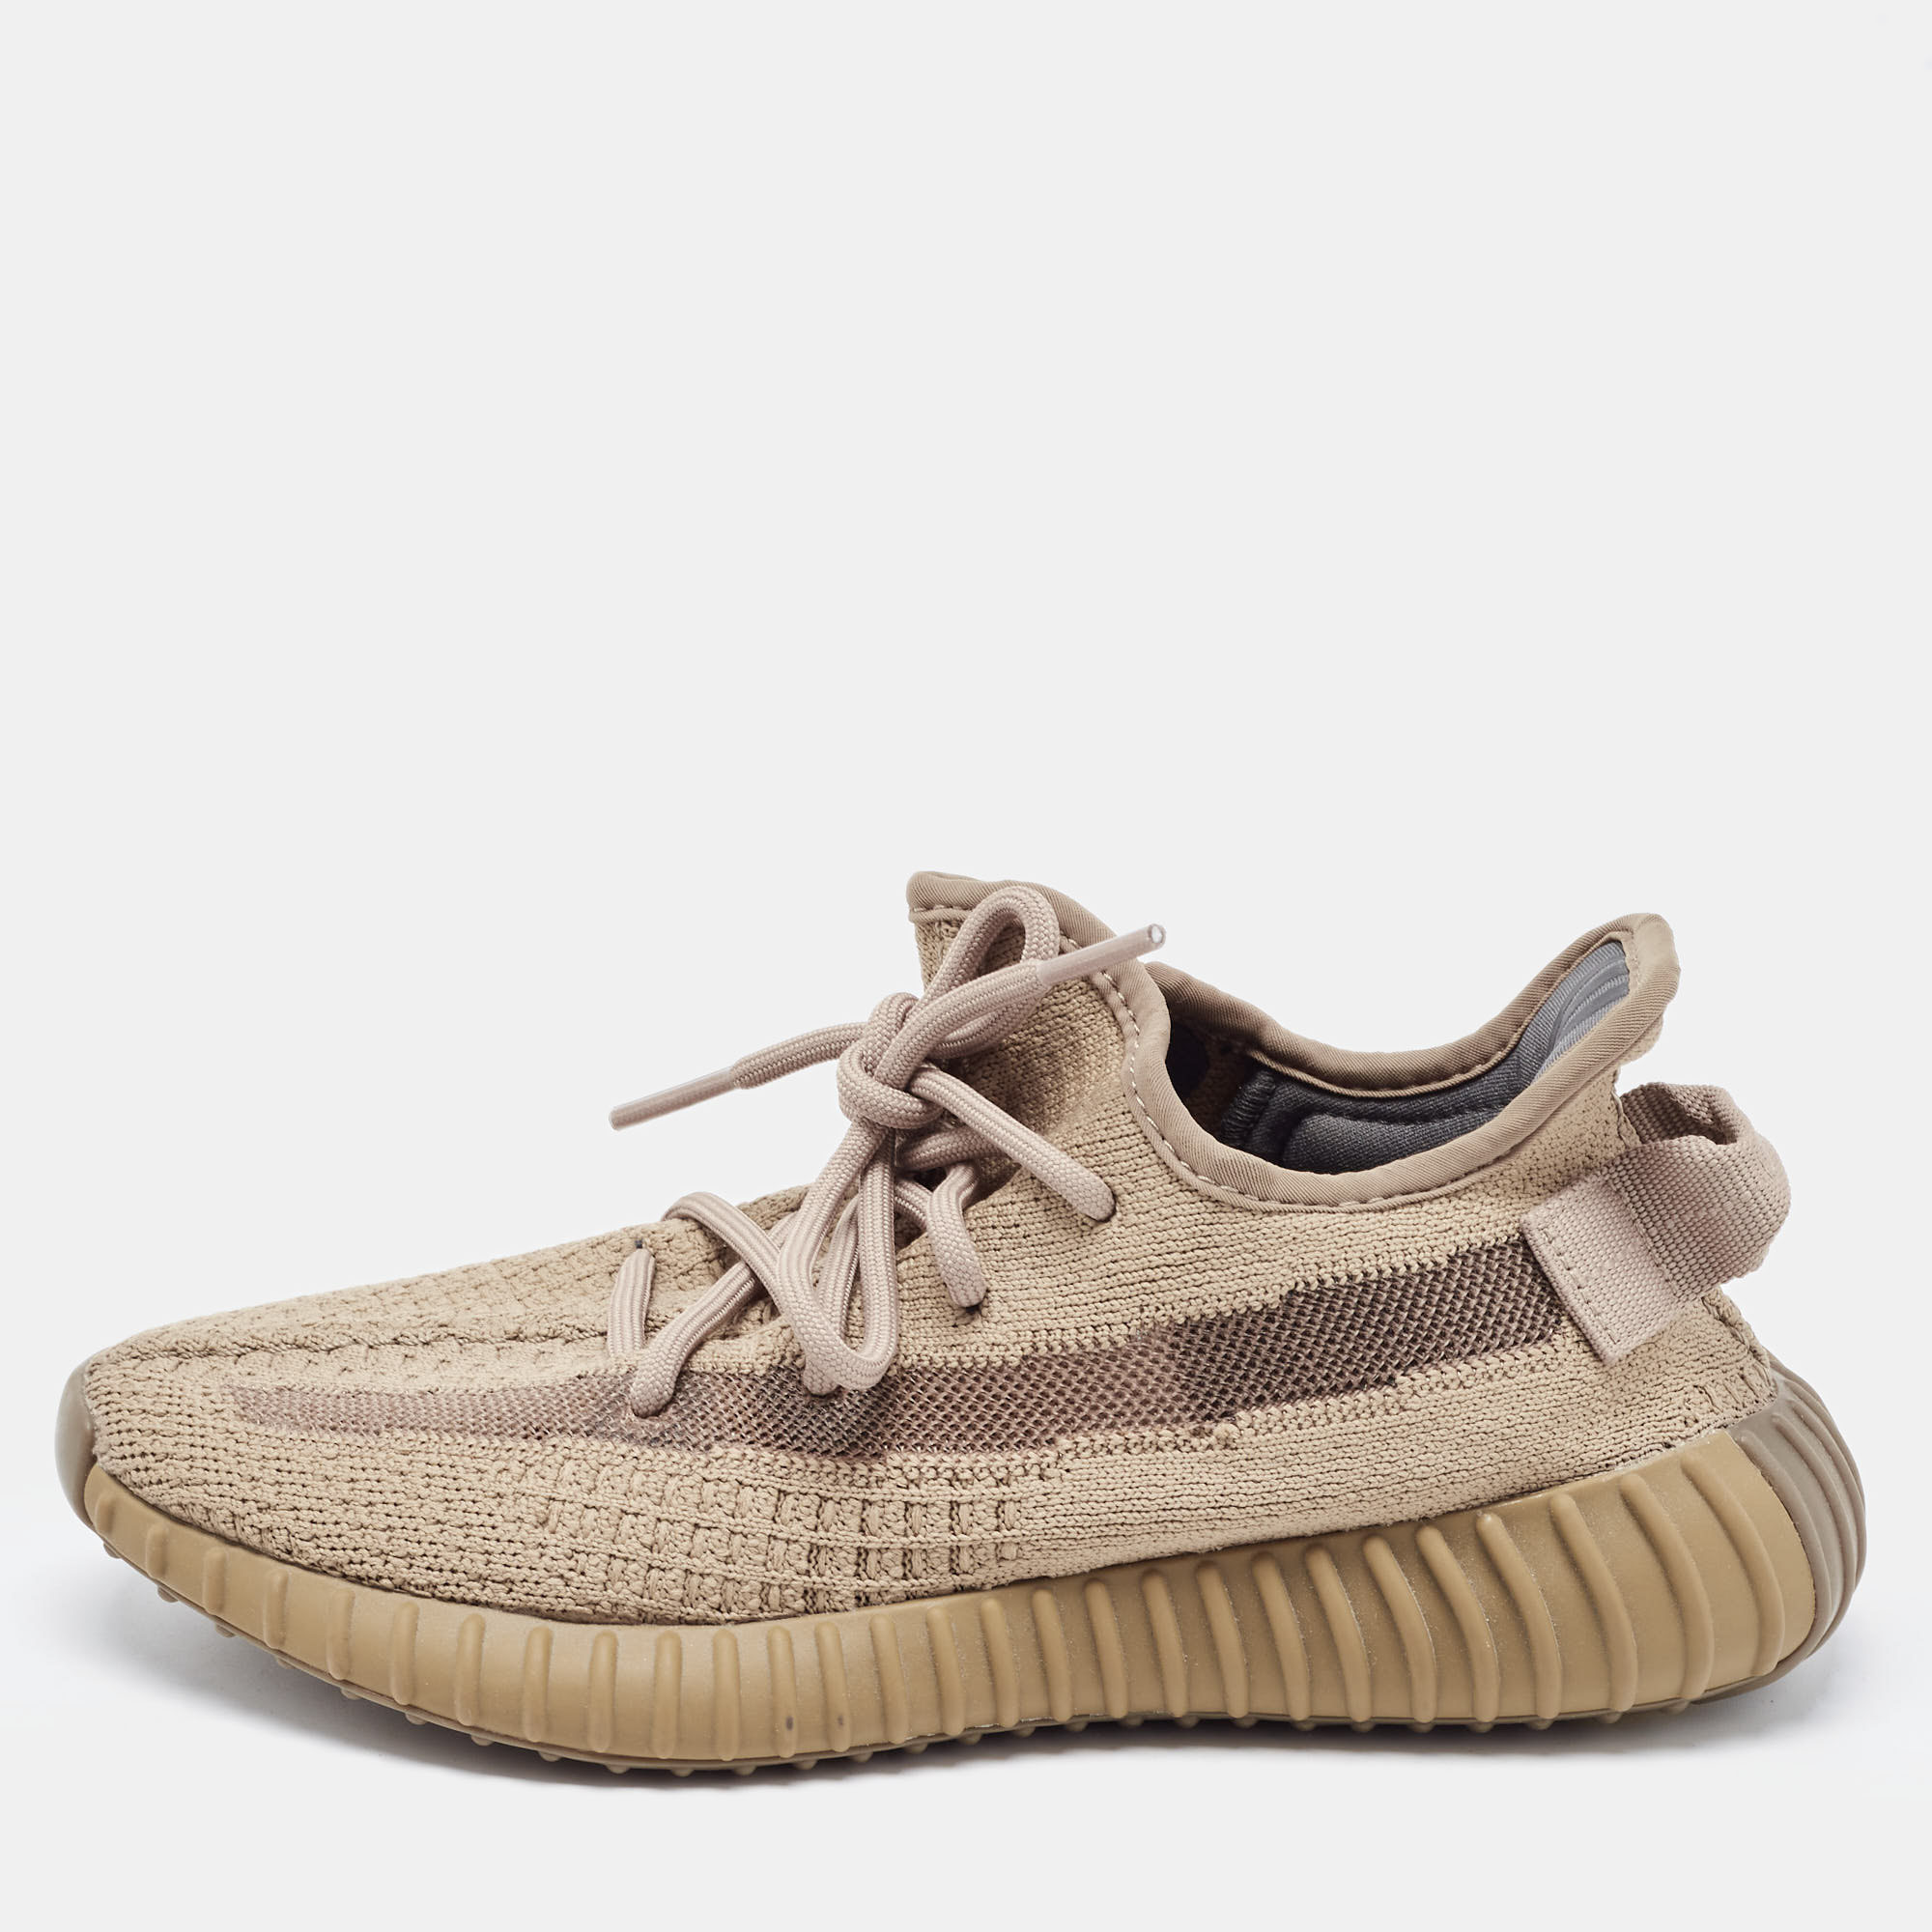 

Yeezy x Adidas Brown Knit Fabric Boost 350 V2 Earth Sneakers Size 38